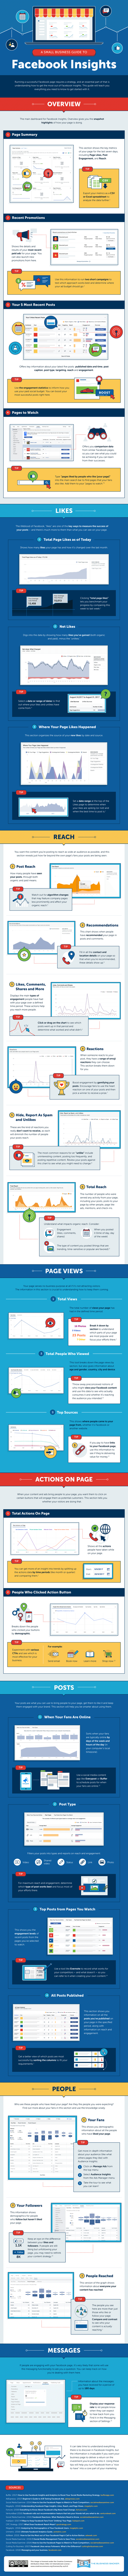 A Small Business Guide to Facebook Insights Infographic